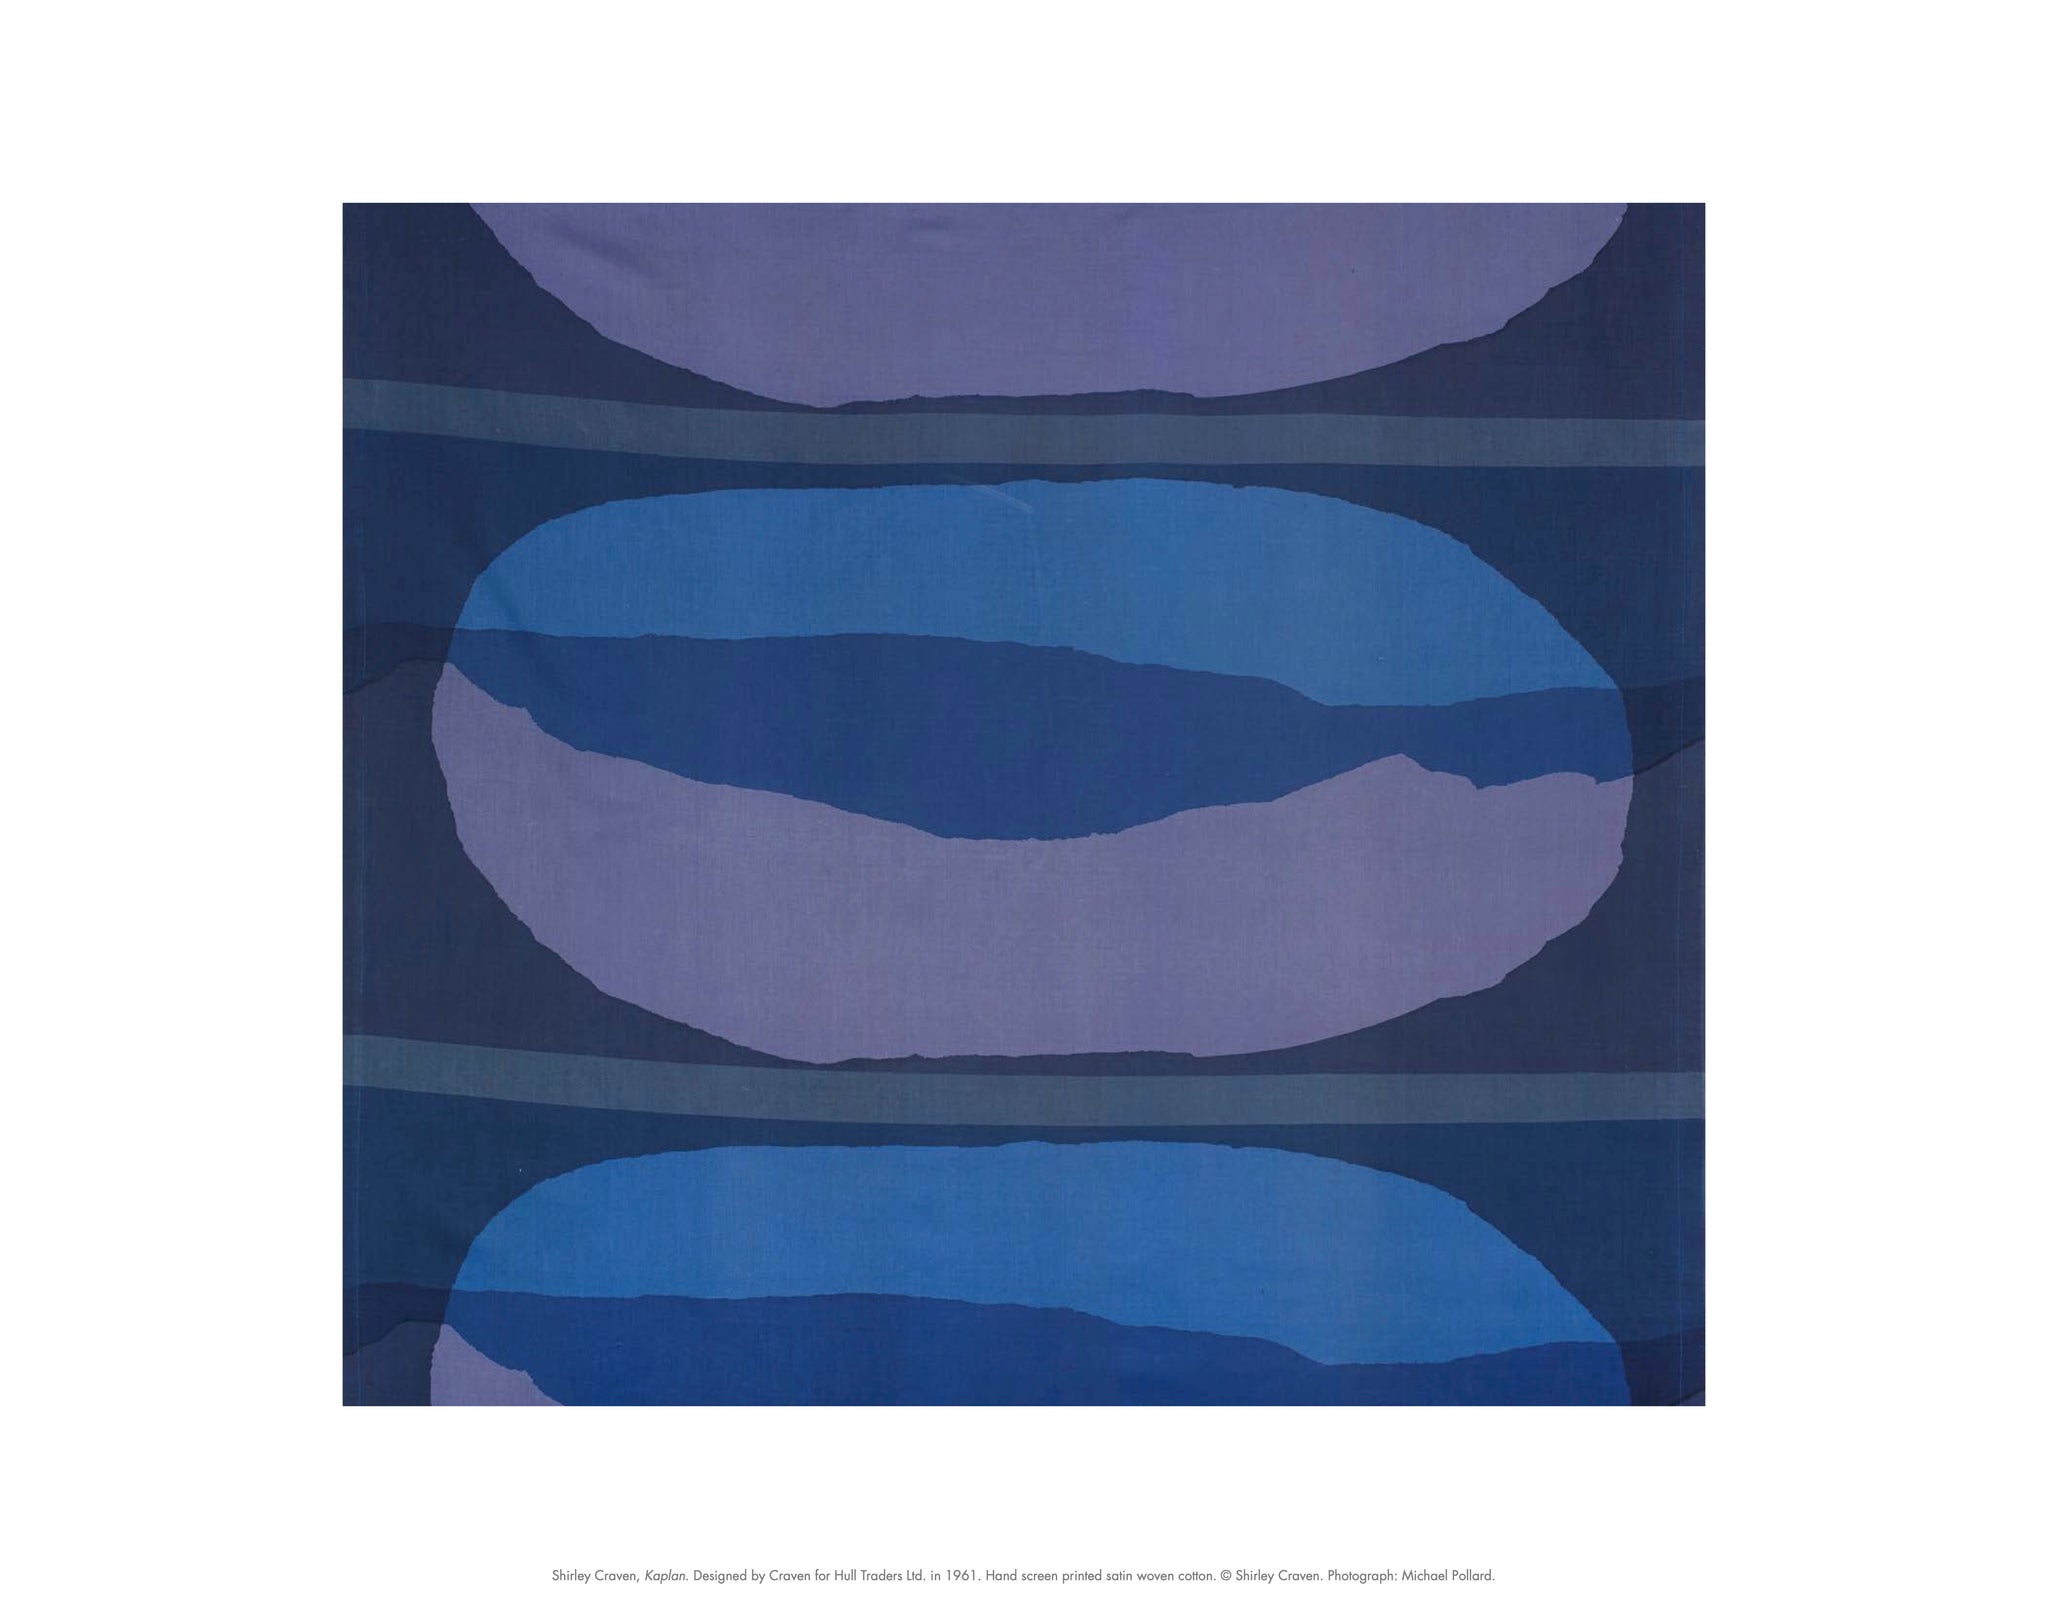 Kaplan design by Shirley Craven - abstract and blue.